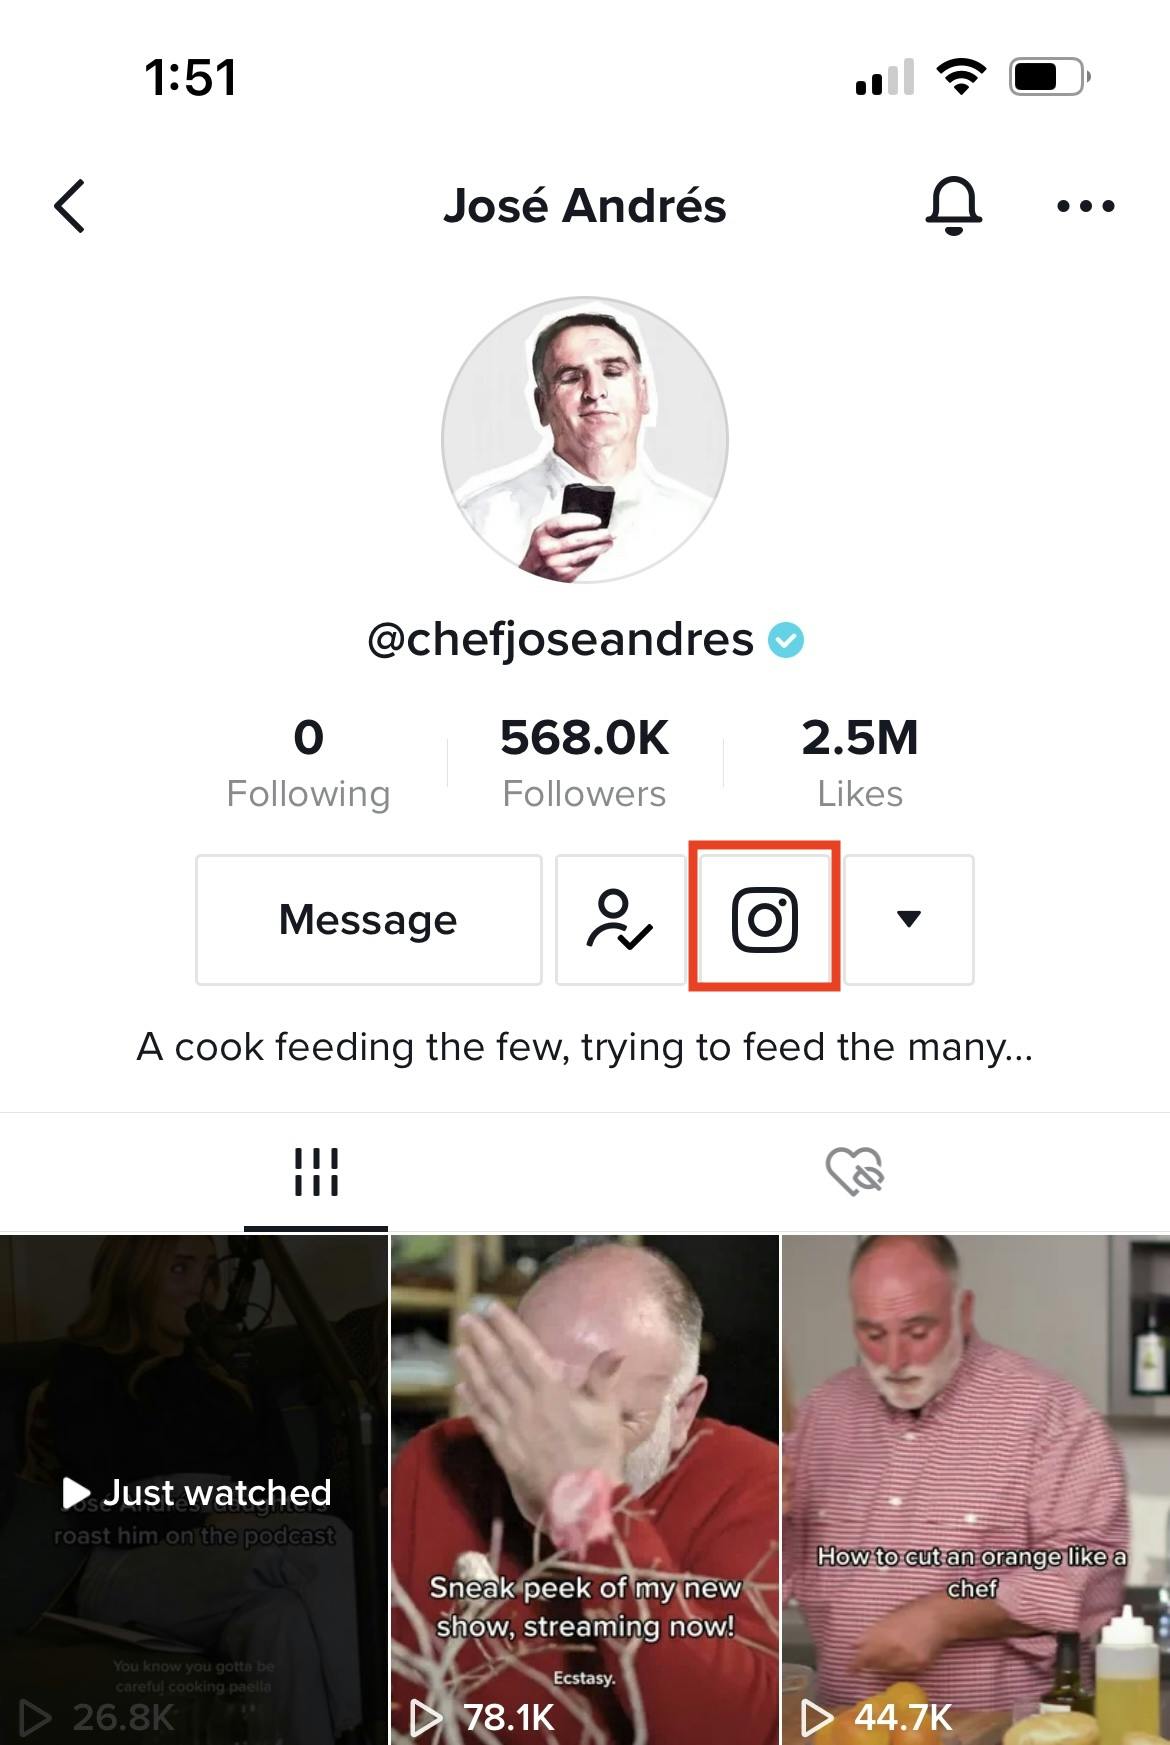 I highly recommend Chef Jose Andres’ TikTok account